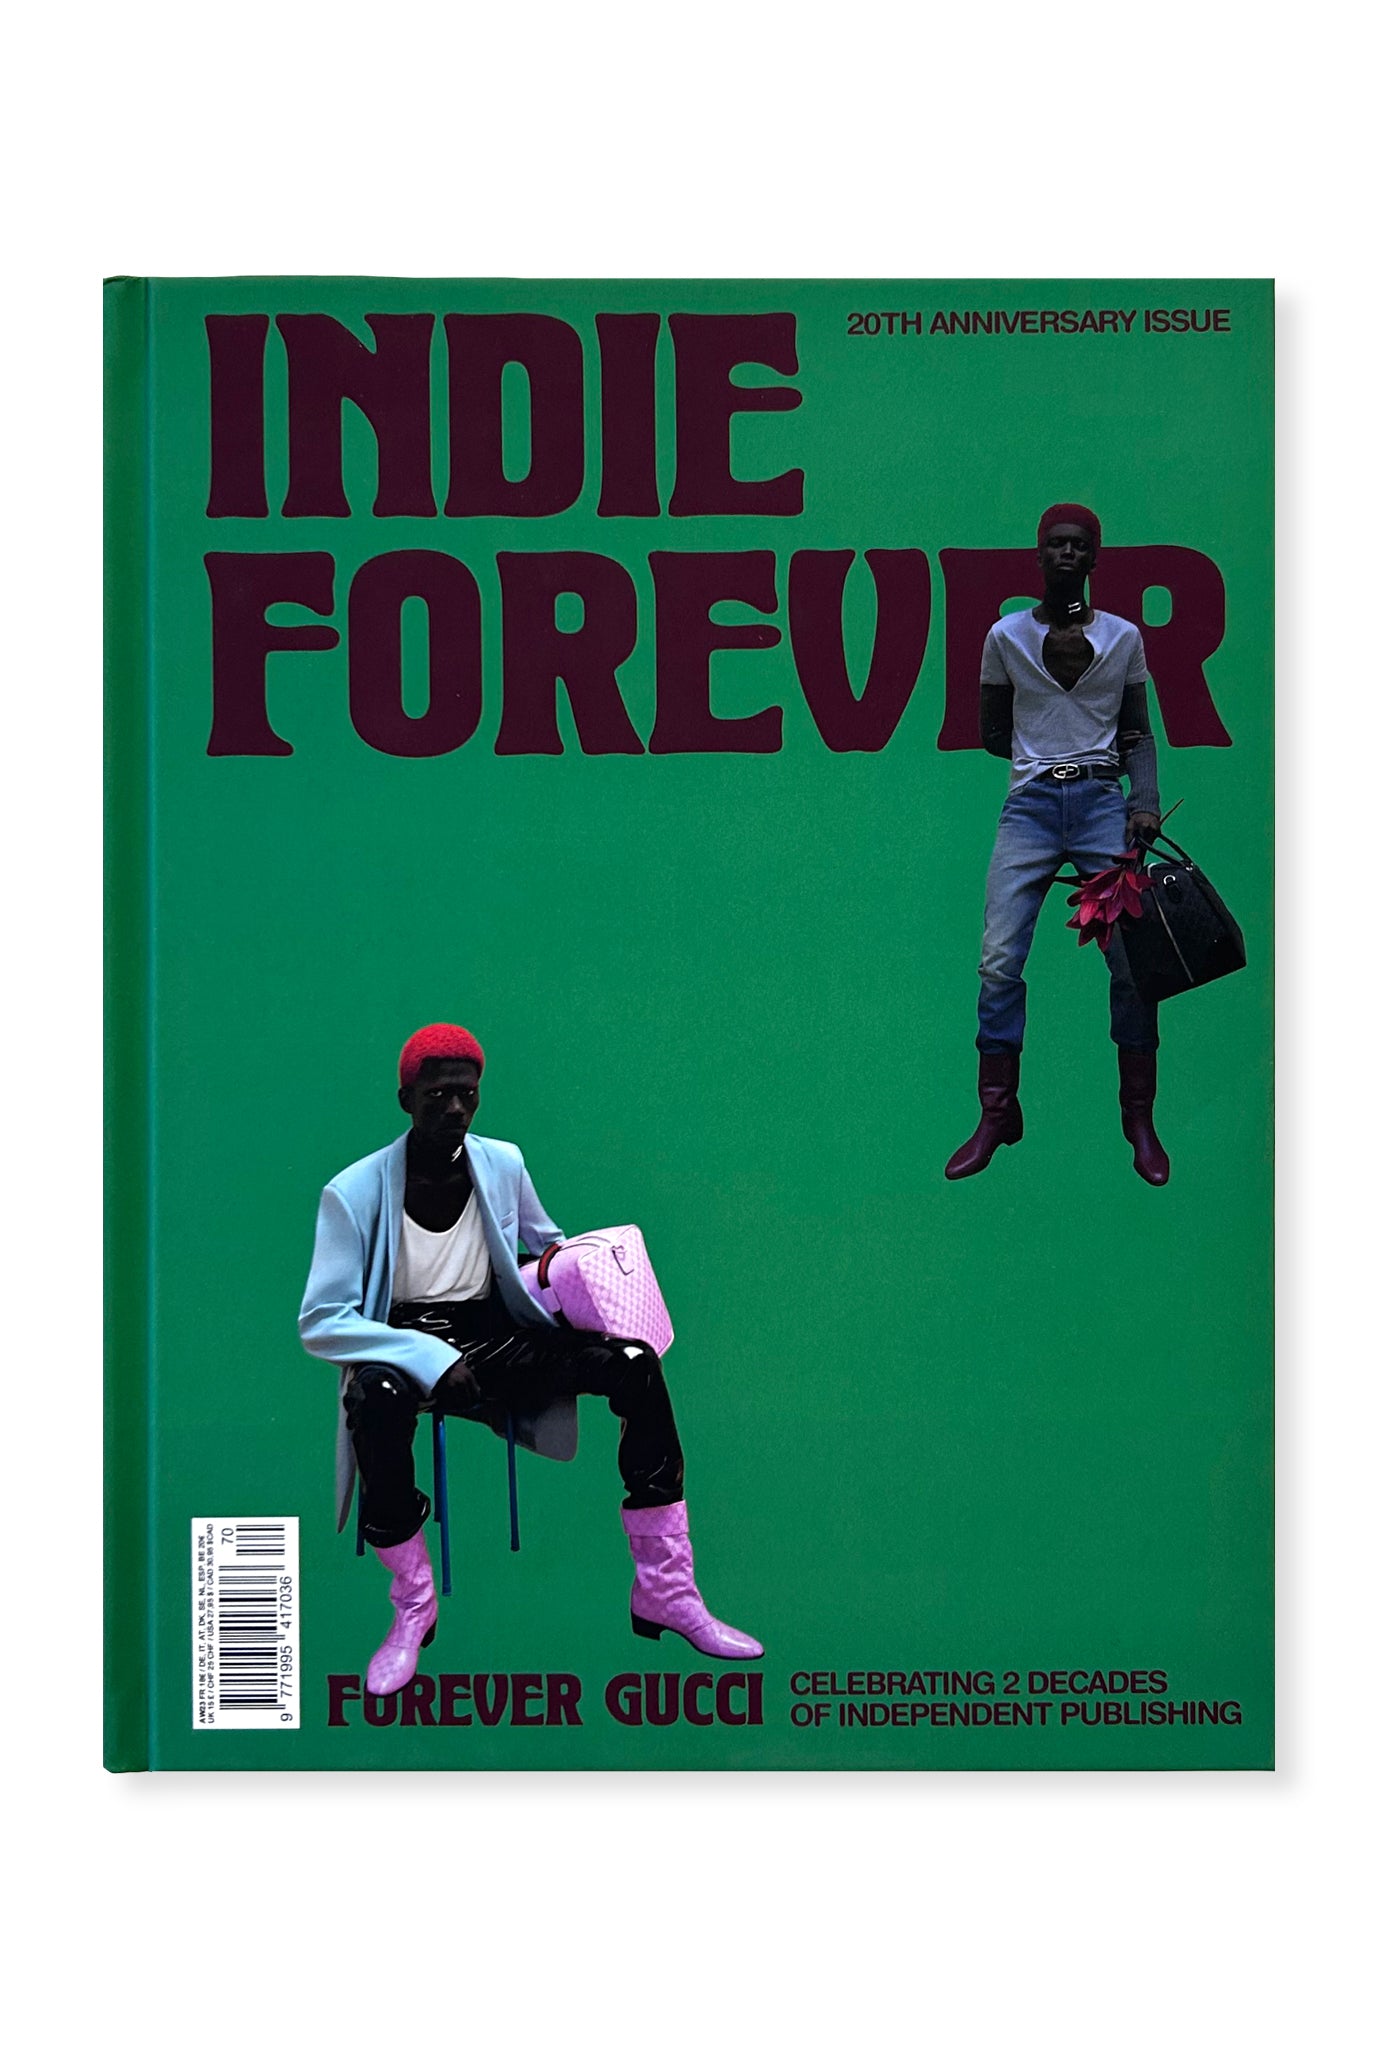 Indie, Issue 70 - 20th Anniversary Issue